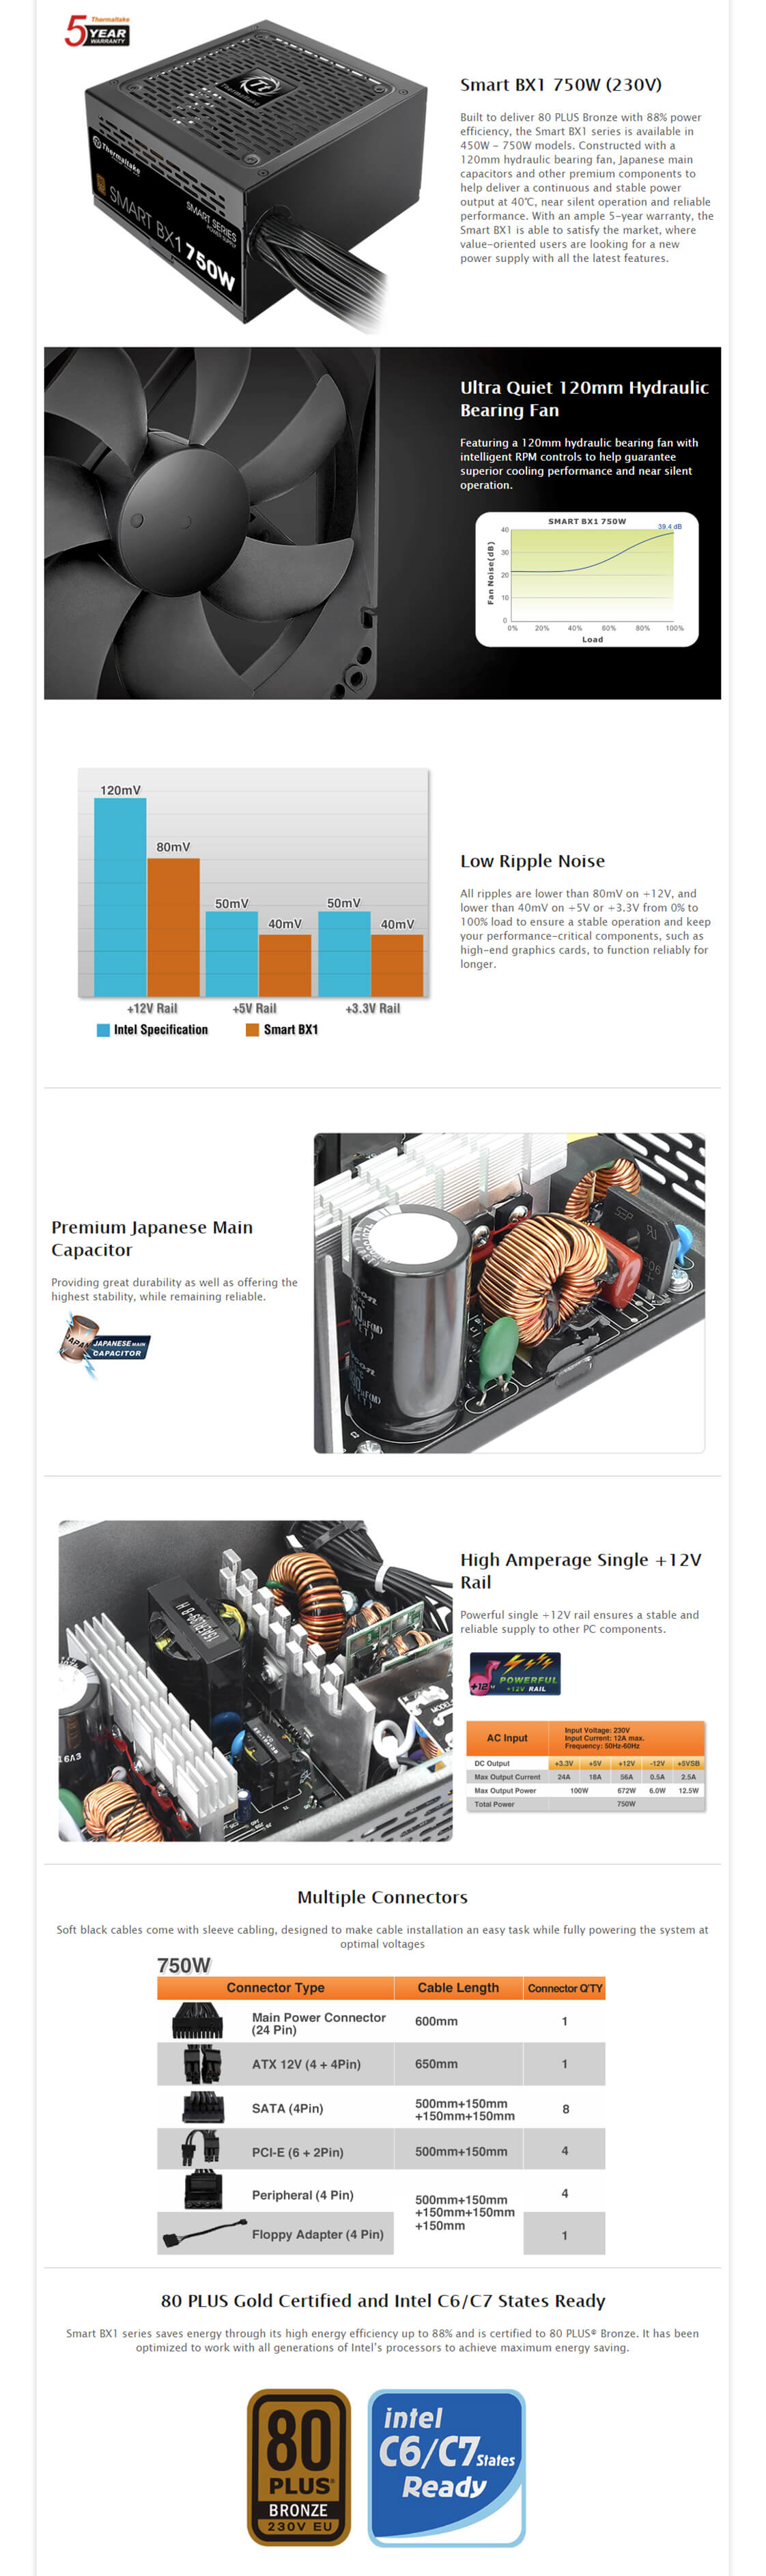 A large marketing image providing additional information about the product Thermaltake Smart BX1 - 750W 80PLUS Bronze ATX PSU - Additional alt info not provided